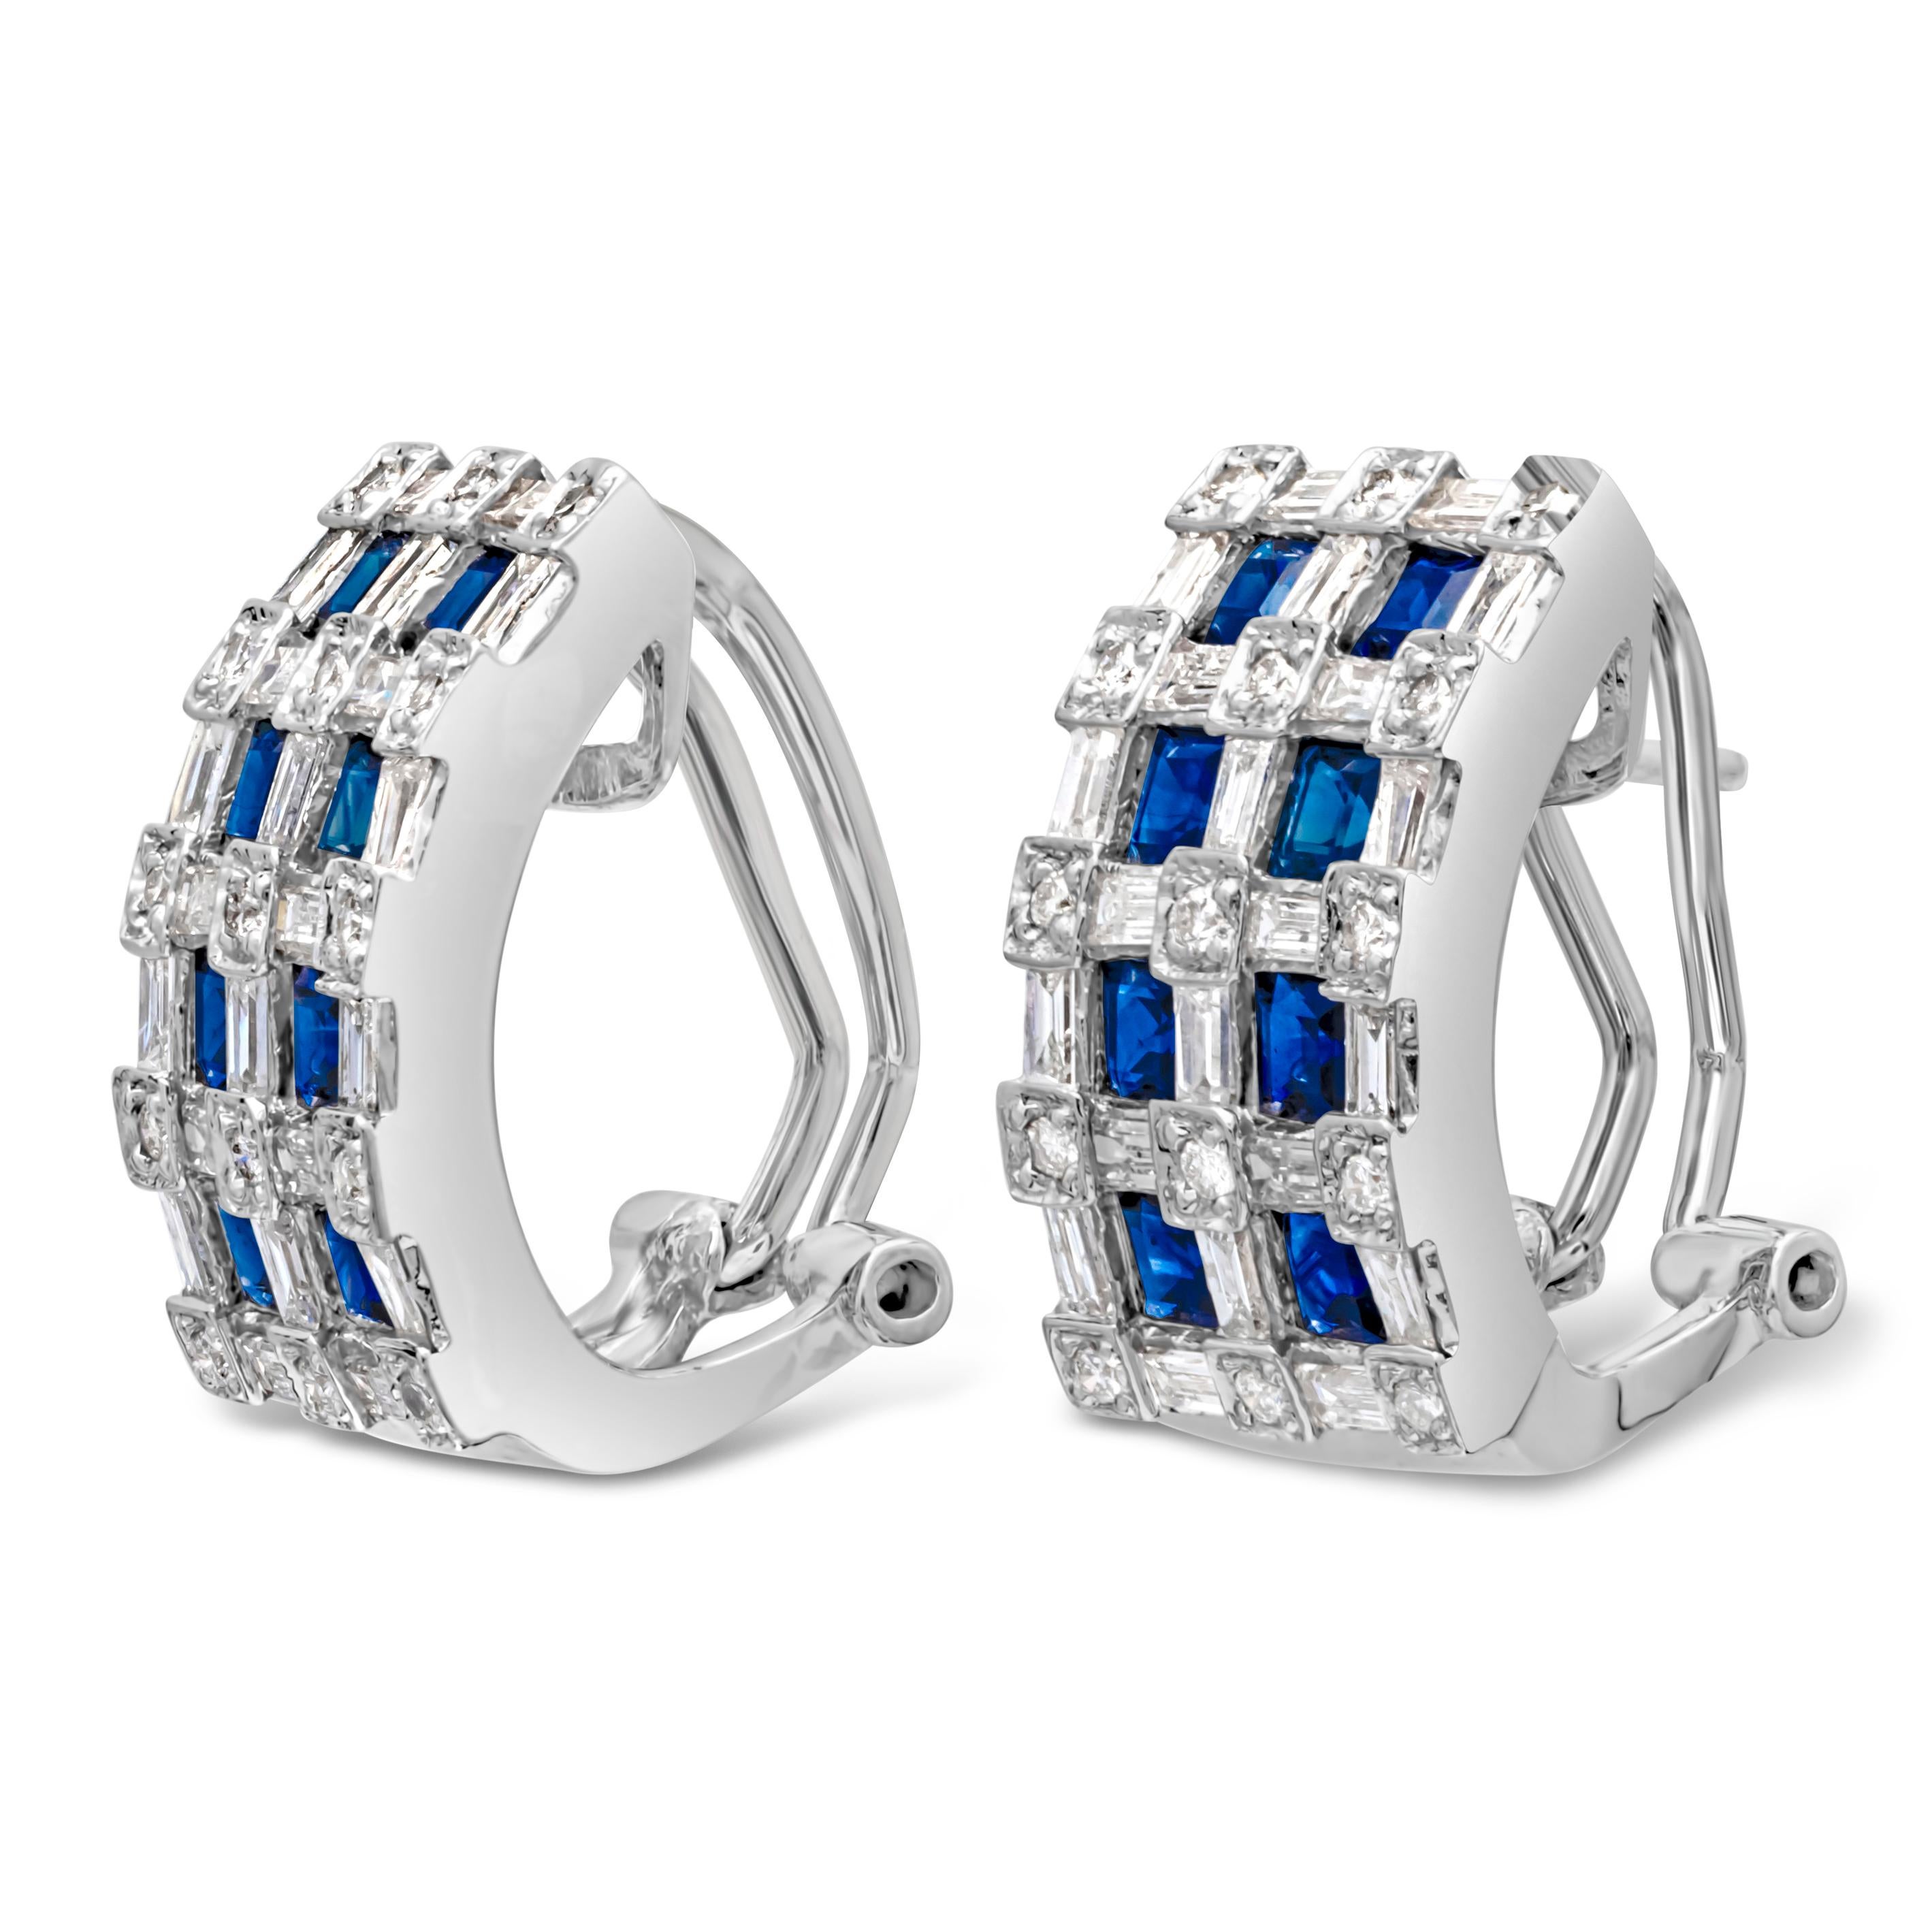 A fashionable and attractive hoop earrings showcasing two rows of 16 asscher cut color-rich blue sapphires weighing 2.40 carats total, encrusted with 74 brilliant mixed cut diamonds weighing 1.50 carats total, G color and SI in clarity. Finely made